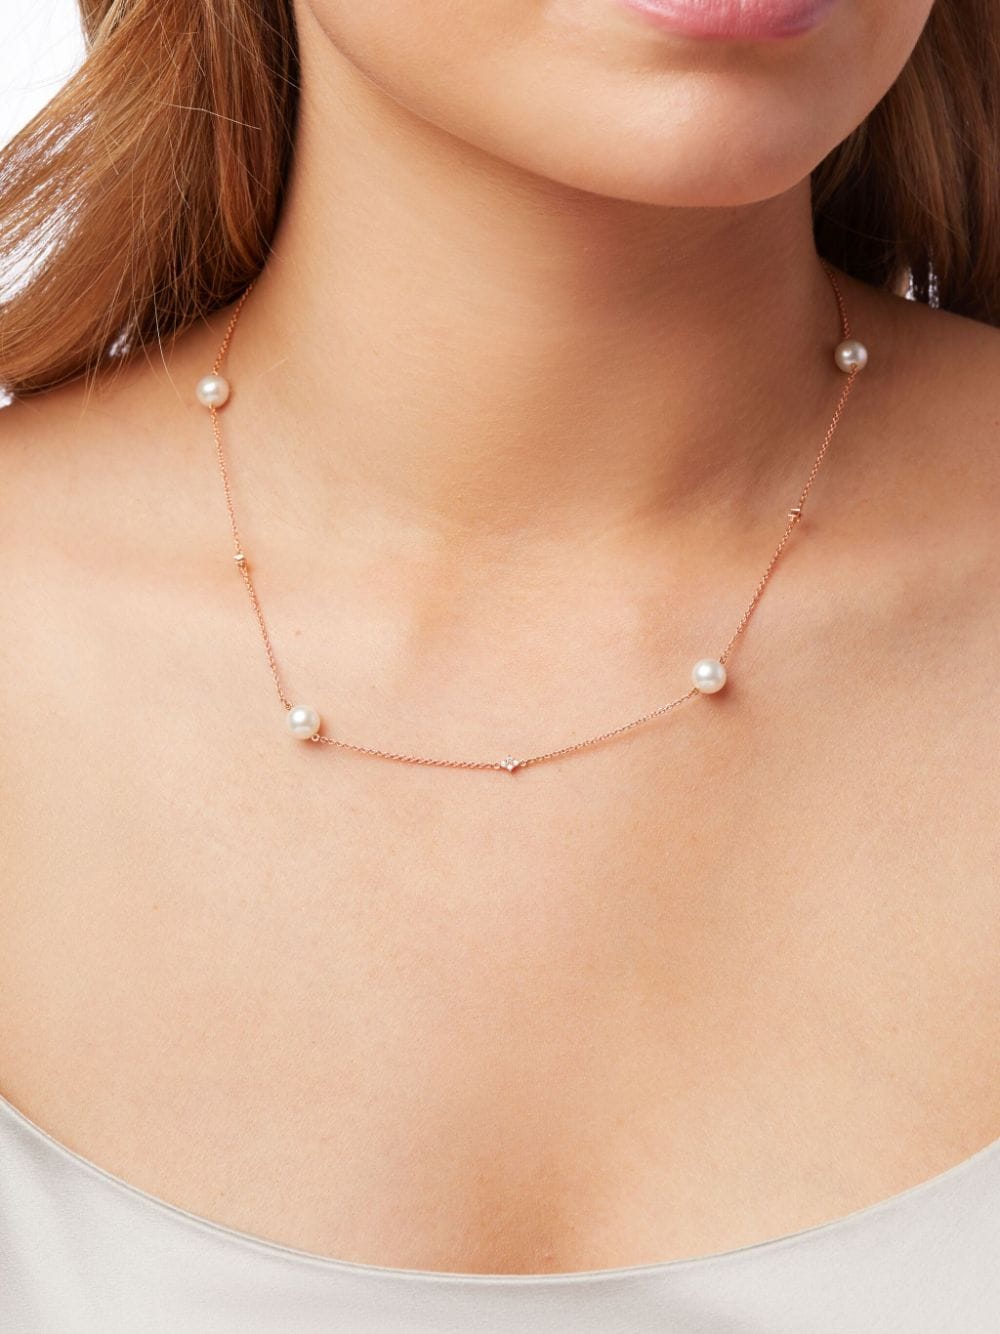 Shop Yoko London 18kt Rose Gold Classic Akoya Pearl And Diamond Necklace In 9